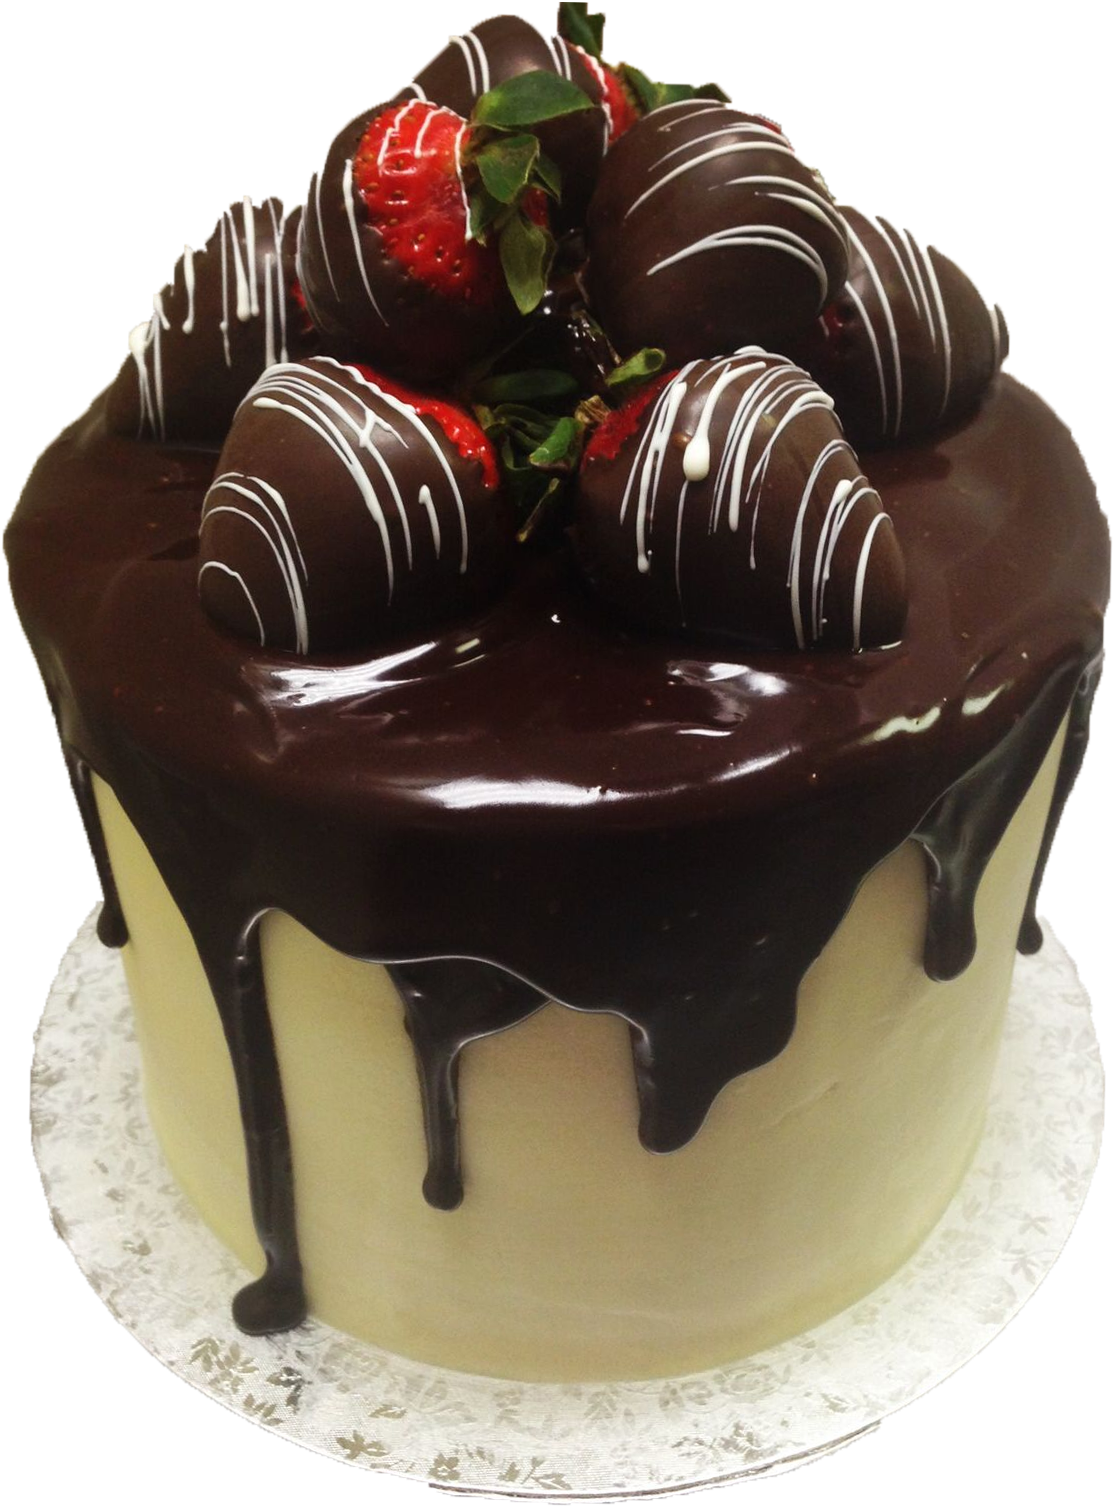 A Cake With Chocolate Covered Strawberries